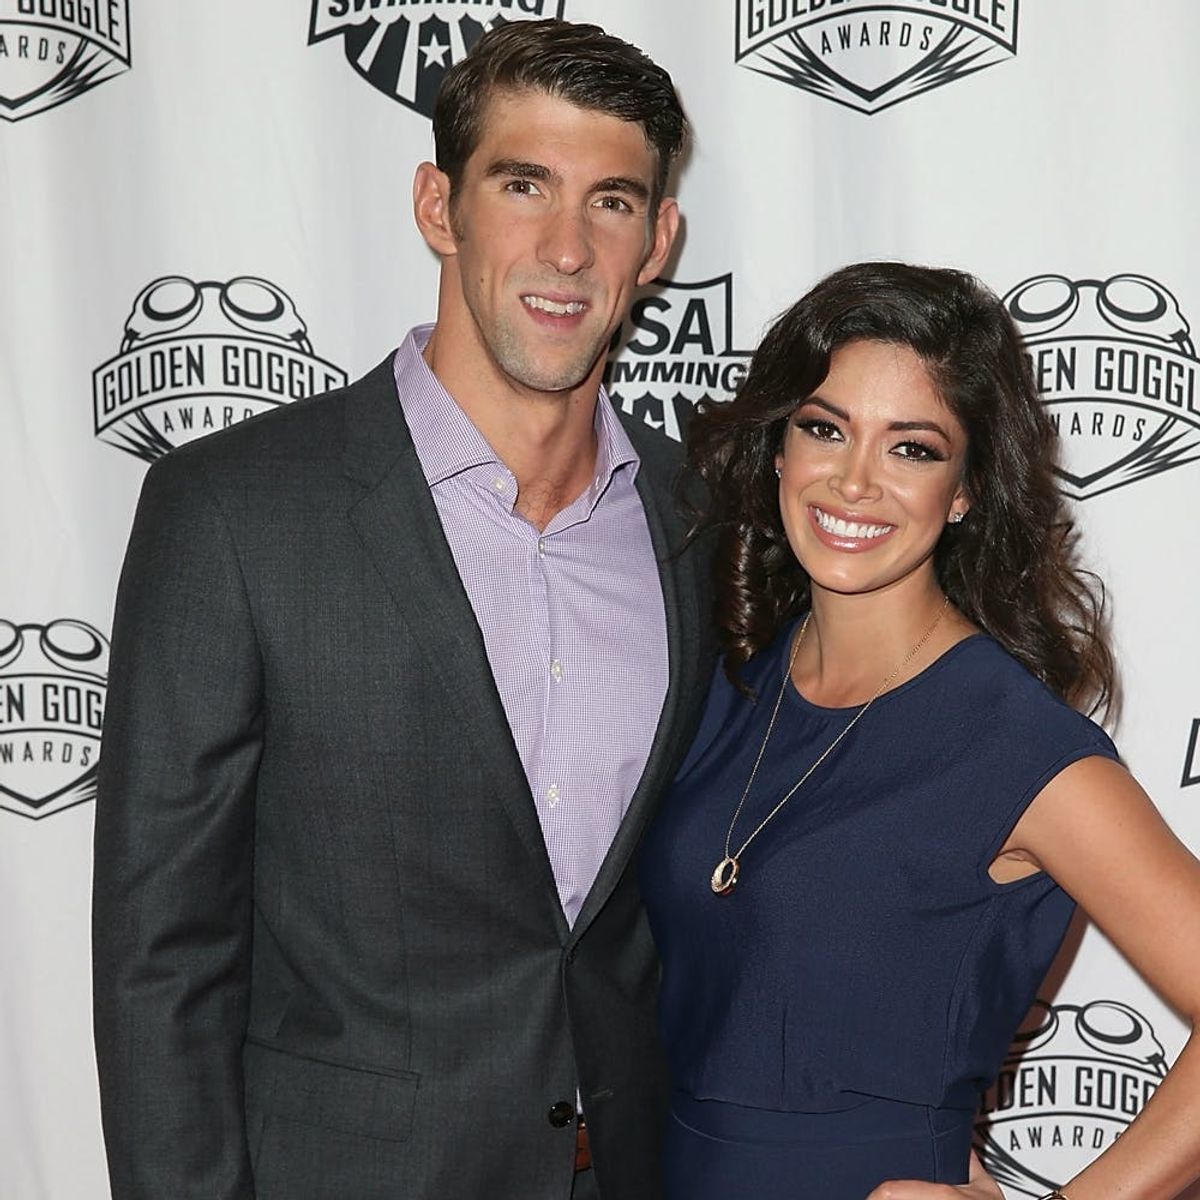 Olympic Swimmer Michael Phelps Shares the Adorable First Photos of Newborn Son